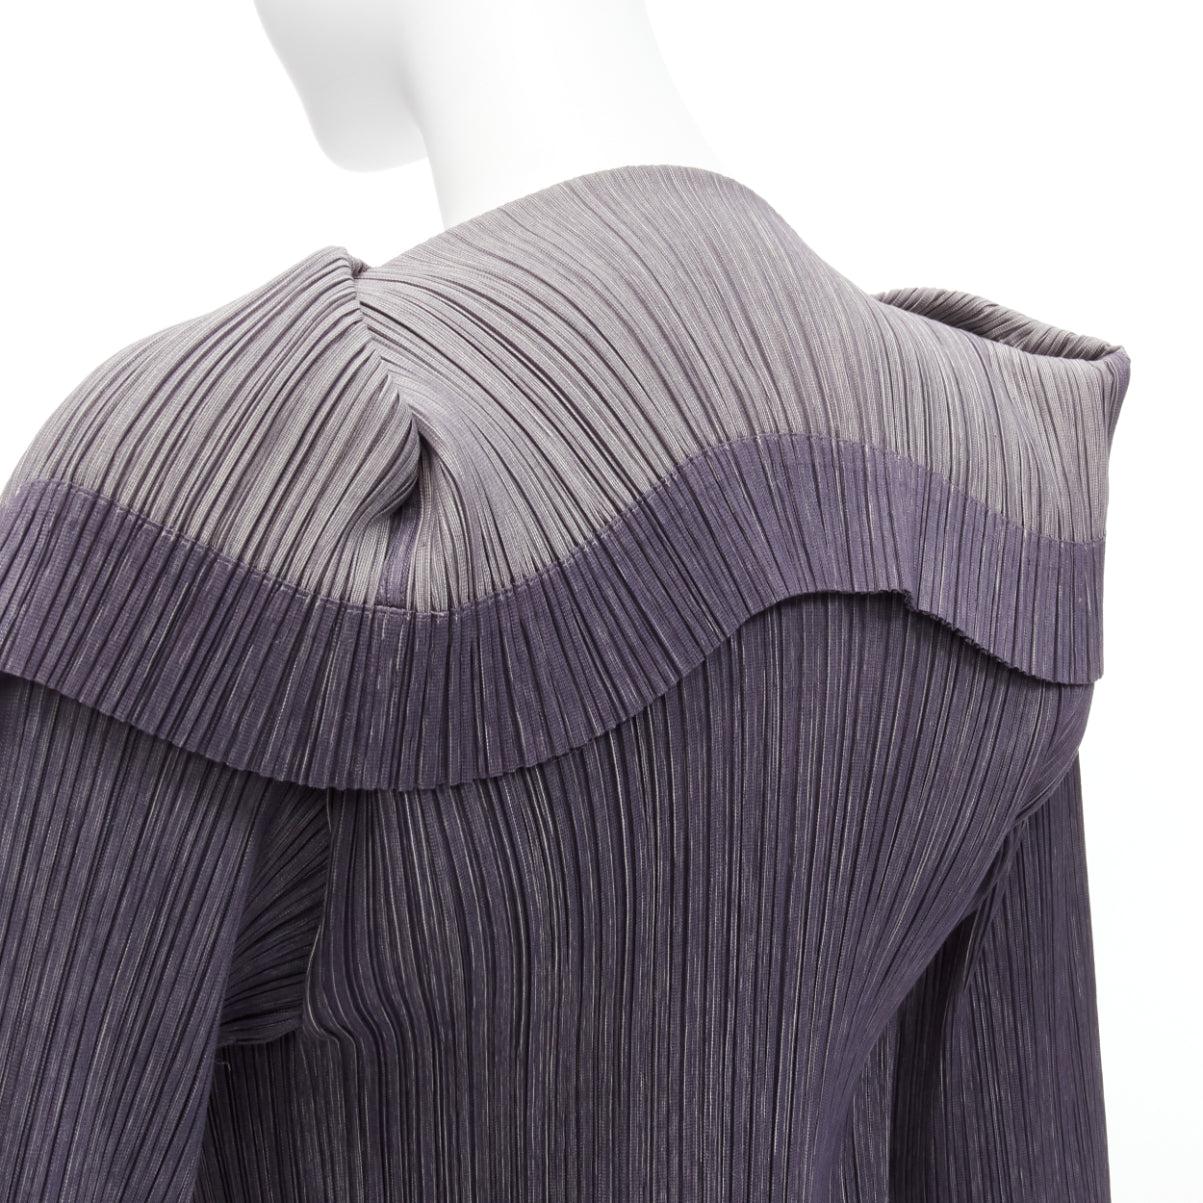 ISSEY MIYAKE PLEATS PLEASE grey purple wide collar pleated plisse jacket
Reference: TGAS/D00457
Brand: Issey Miyake Pleats Please
Material: Cotton, Polyester
Color: Grey, Purple
Pattern: Solid
Closure: Button
Lining: Grey Fabric
Extra Details: 2 way